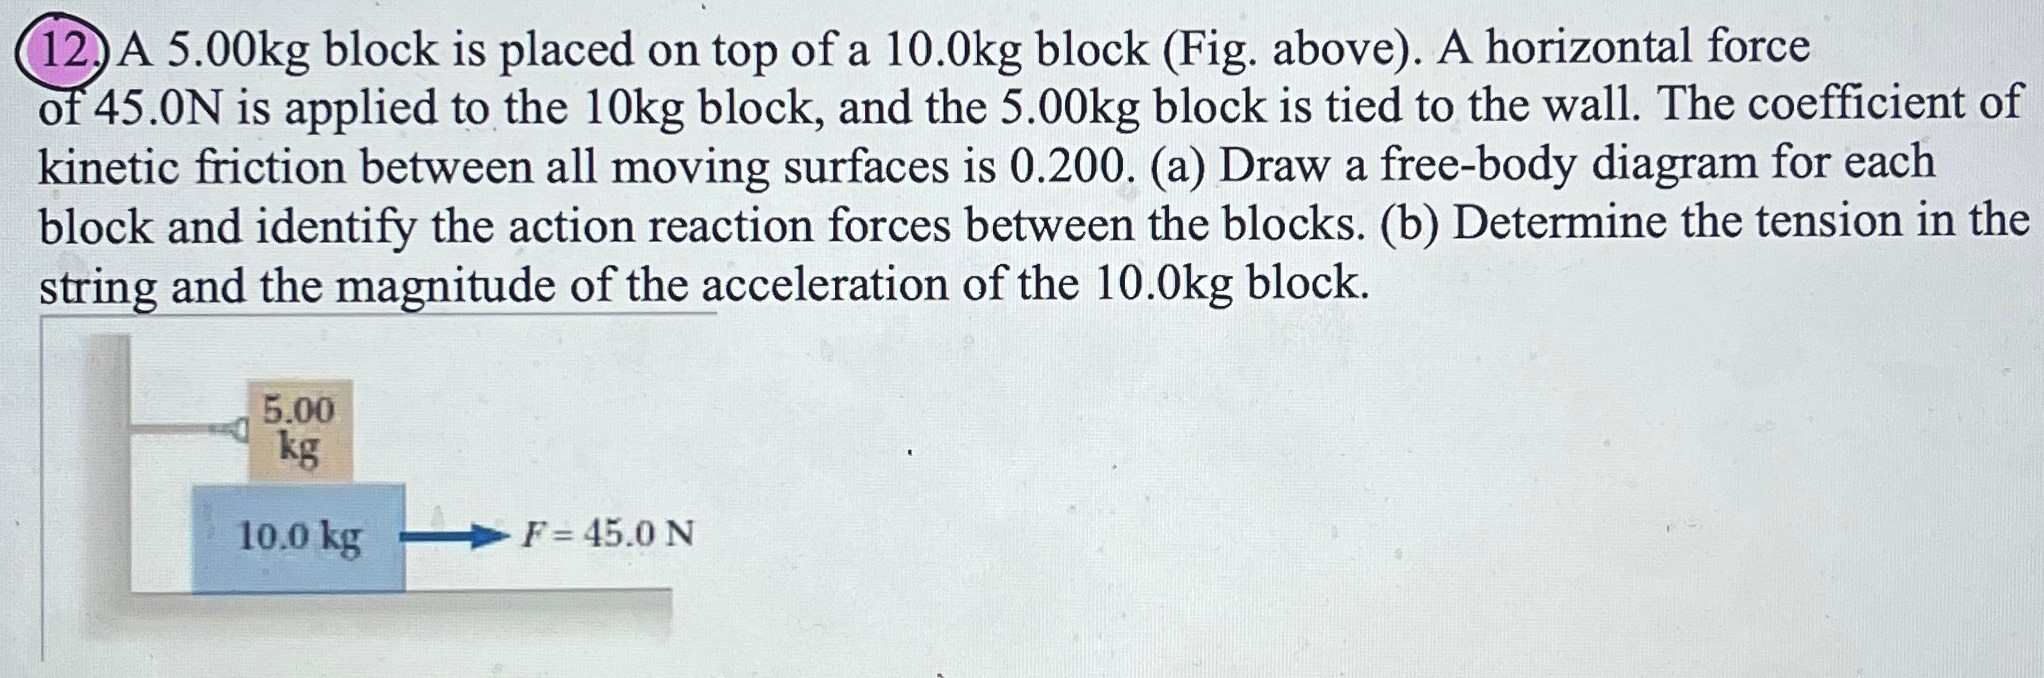 A 5.00 kg block is placed on top of a 10.0 kg block (Fig. above). A horizontal force of 45.0 N is applied to the 10 kg block, and the 5.00 kg block is tied to the wall. The coefficient of kinetic friction between all moving surfaces is 0.200 . (a) Draw a free-body diagram for each block and identify the action reaction forces between the blocks. (b) Determine the tension in the string and the magnitude of the acceleration of the 10.0 kg block.